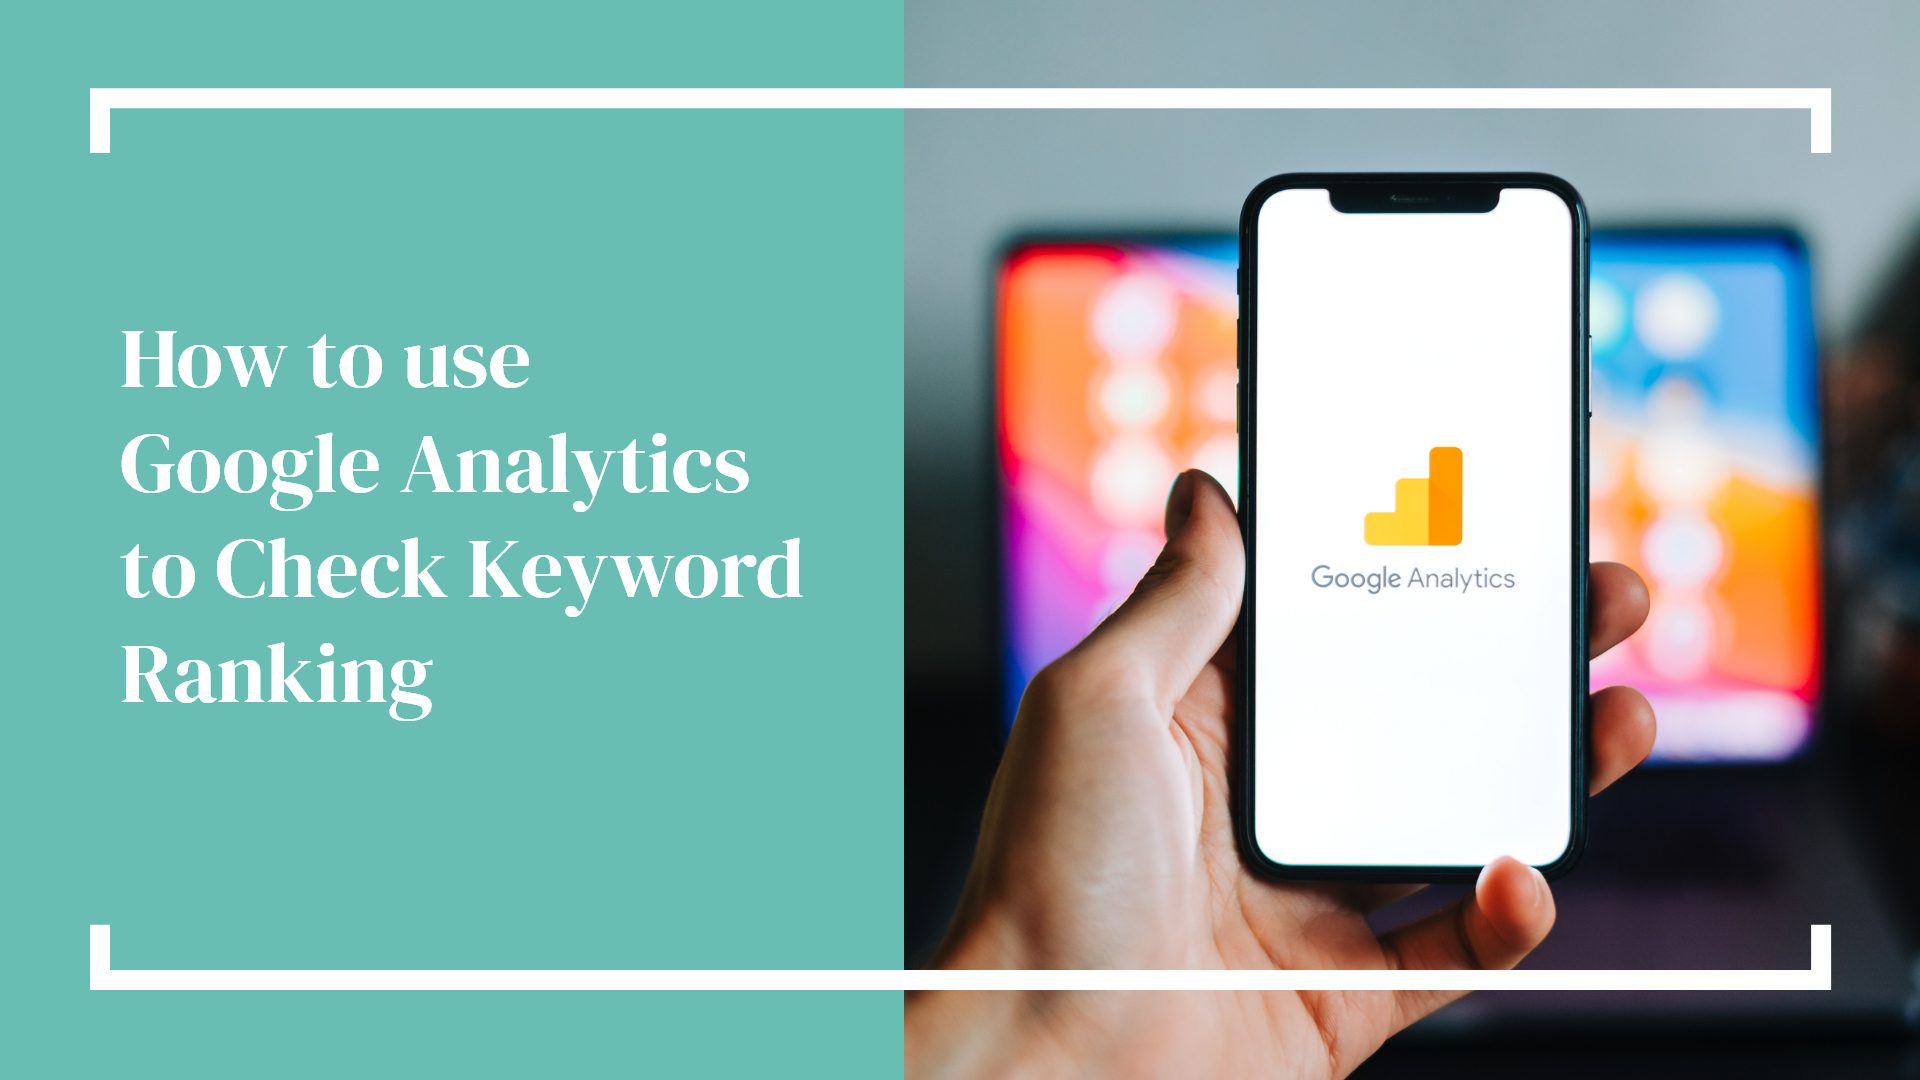 How to Check Keyword Ranking in Google Analytics and Why It’s Important